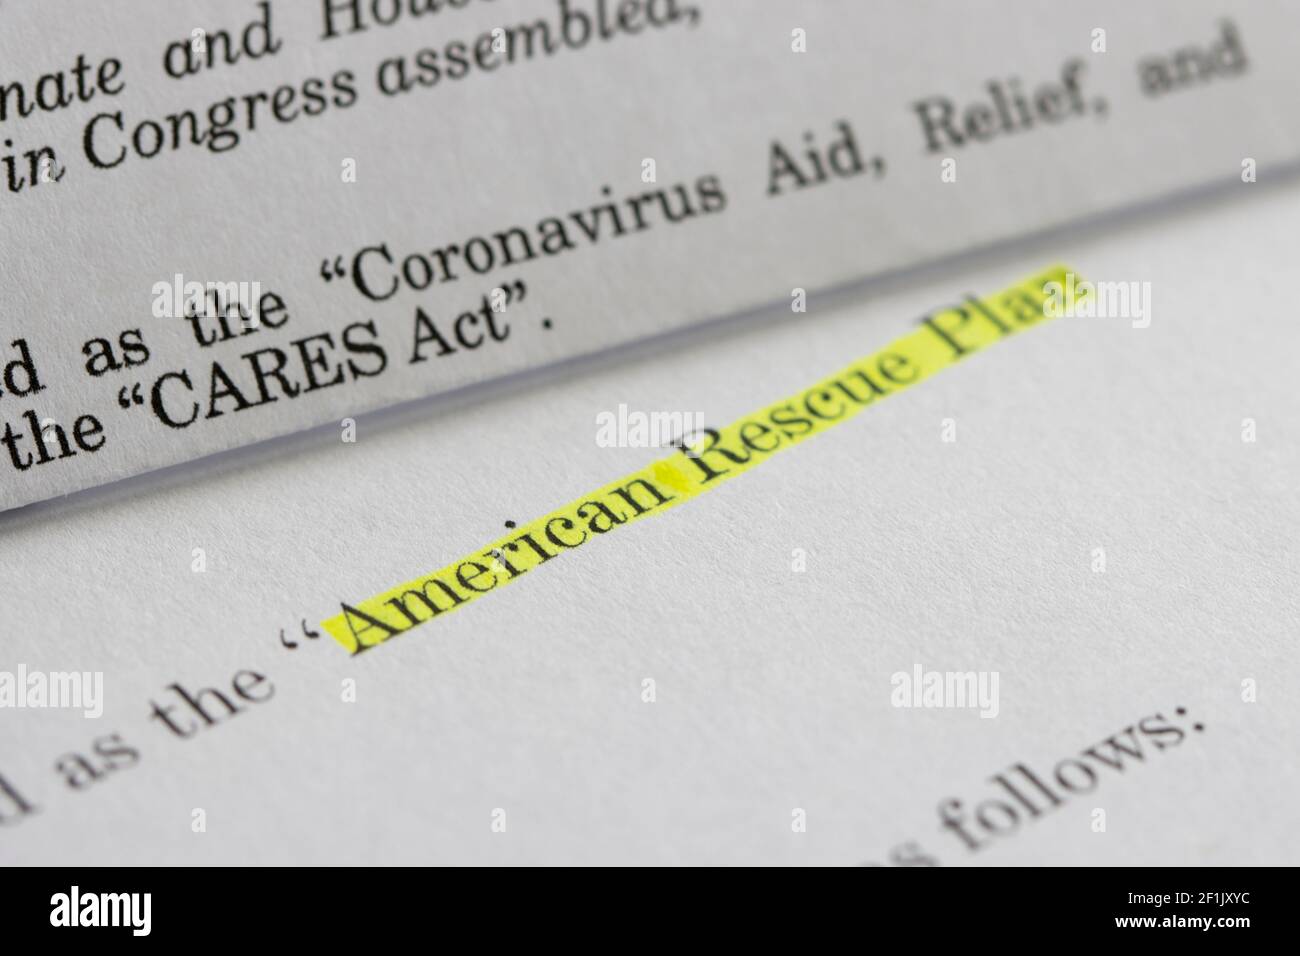 Closeup of the documents of both the Cares Act (Coronavirus Aid, Relief, and Economic Security Act) and the American Rescue Plan Act of 2021. Stock Photo